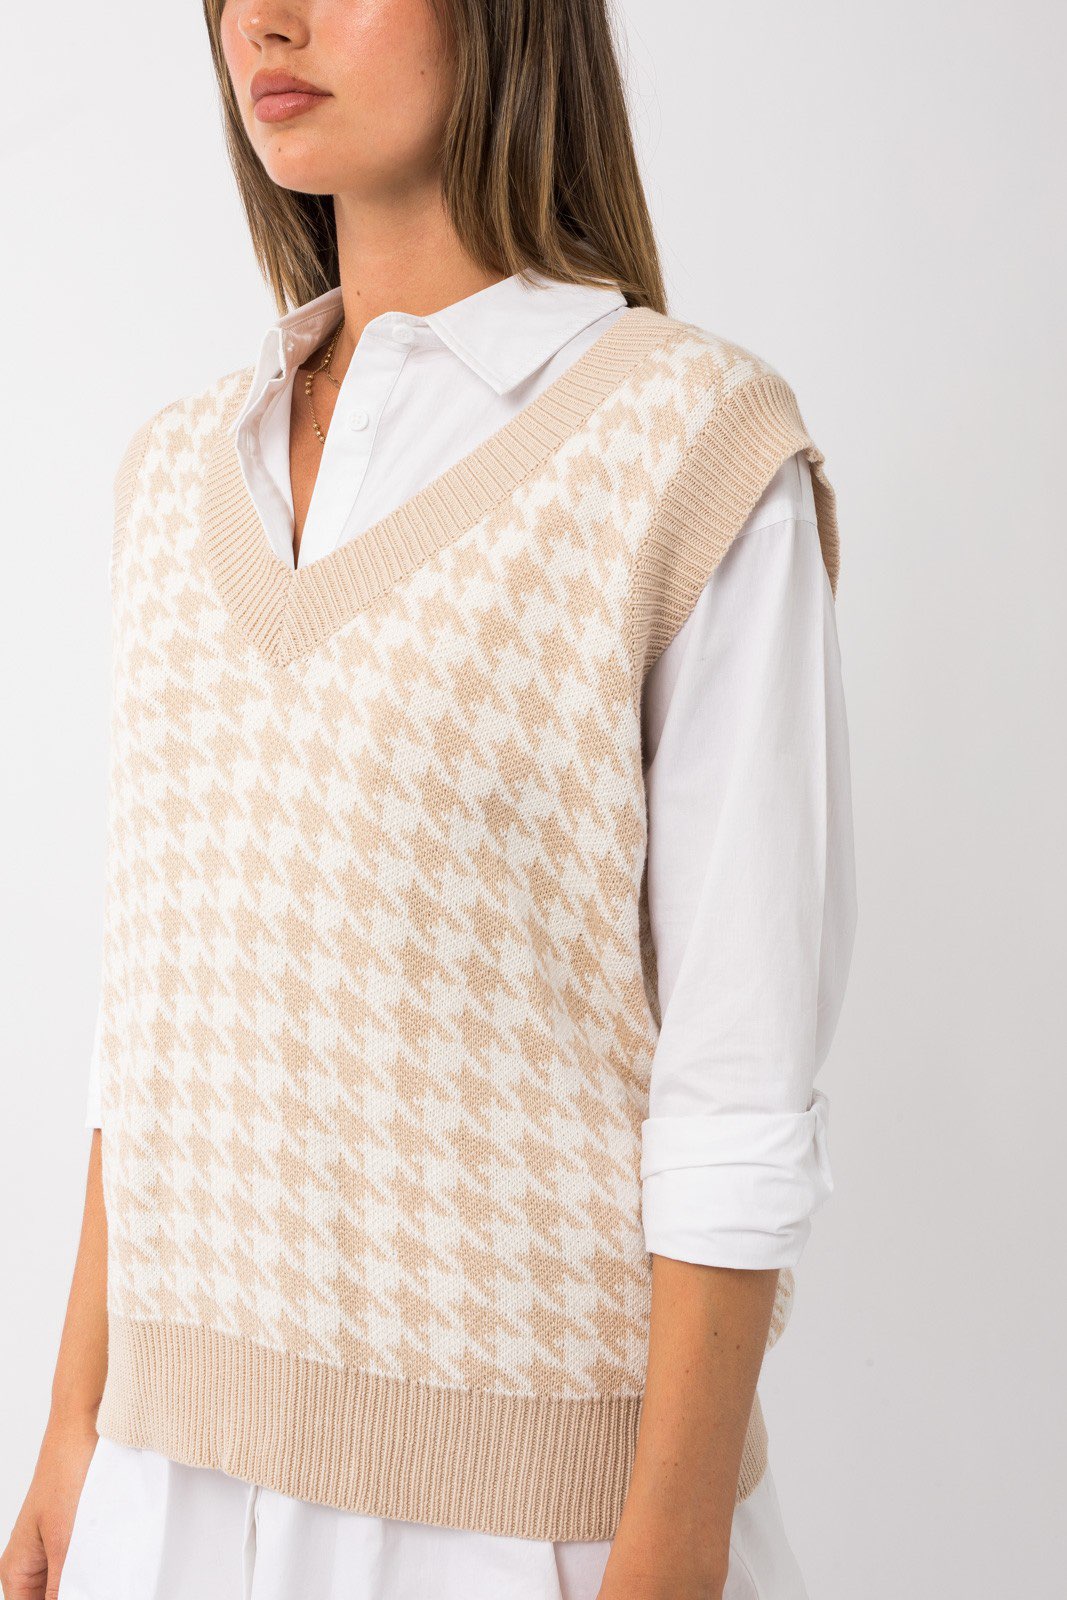 Houndstooth Sweater Vest - Cream/Taupe